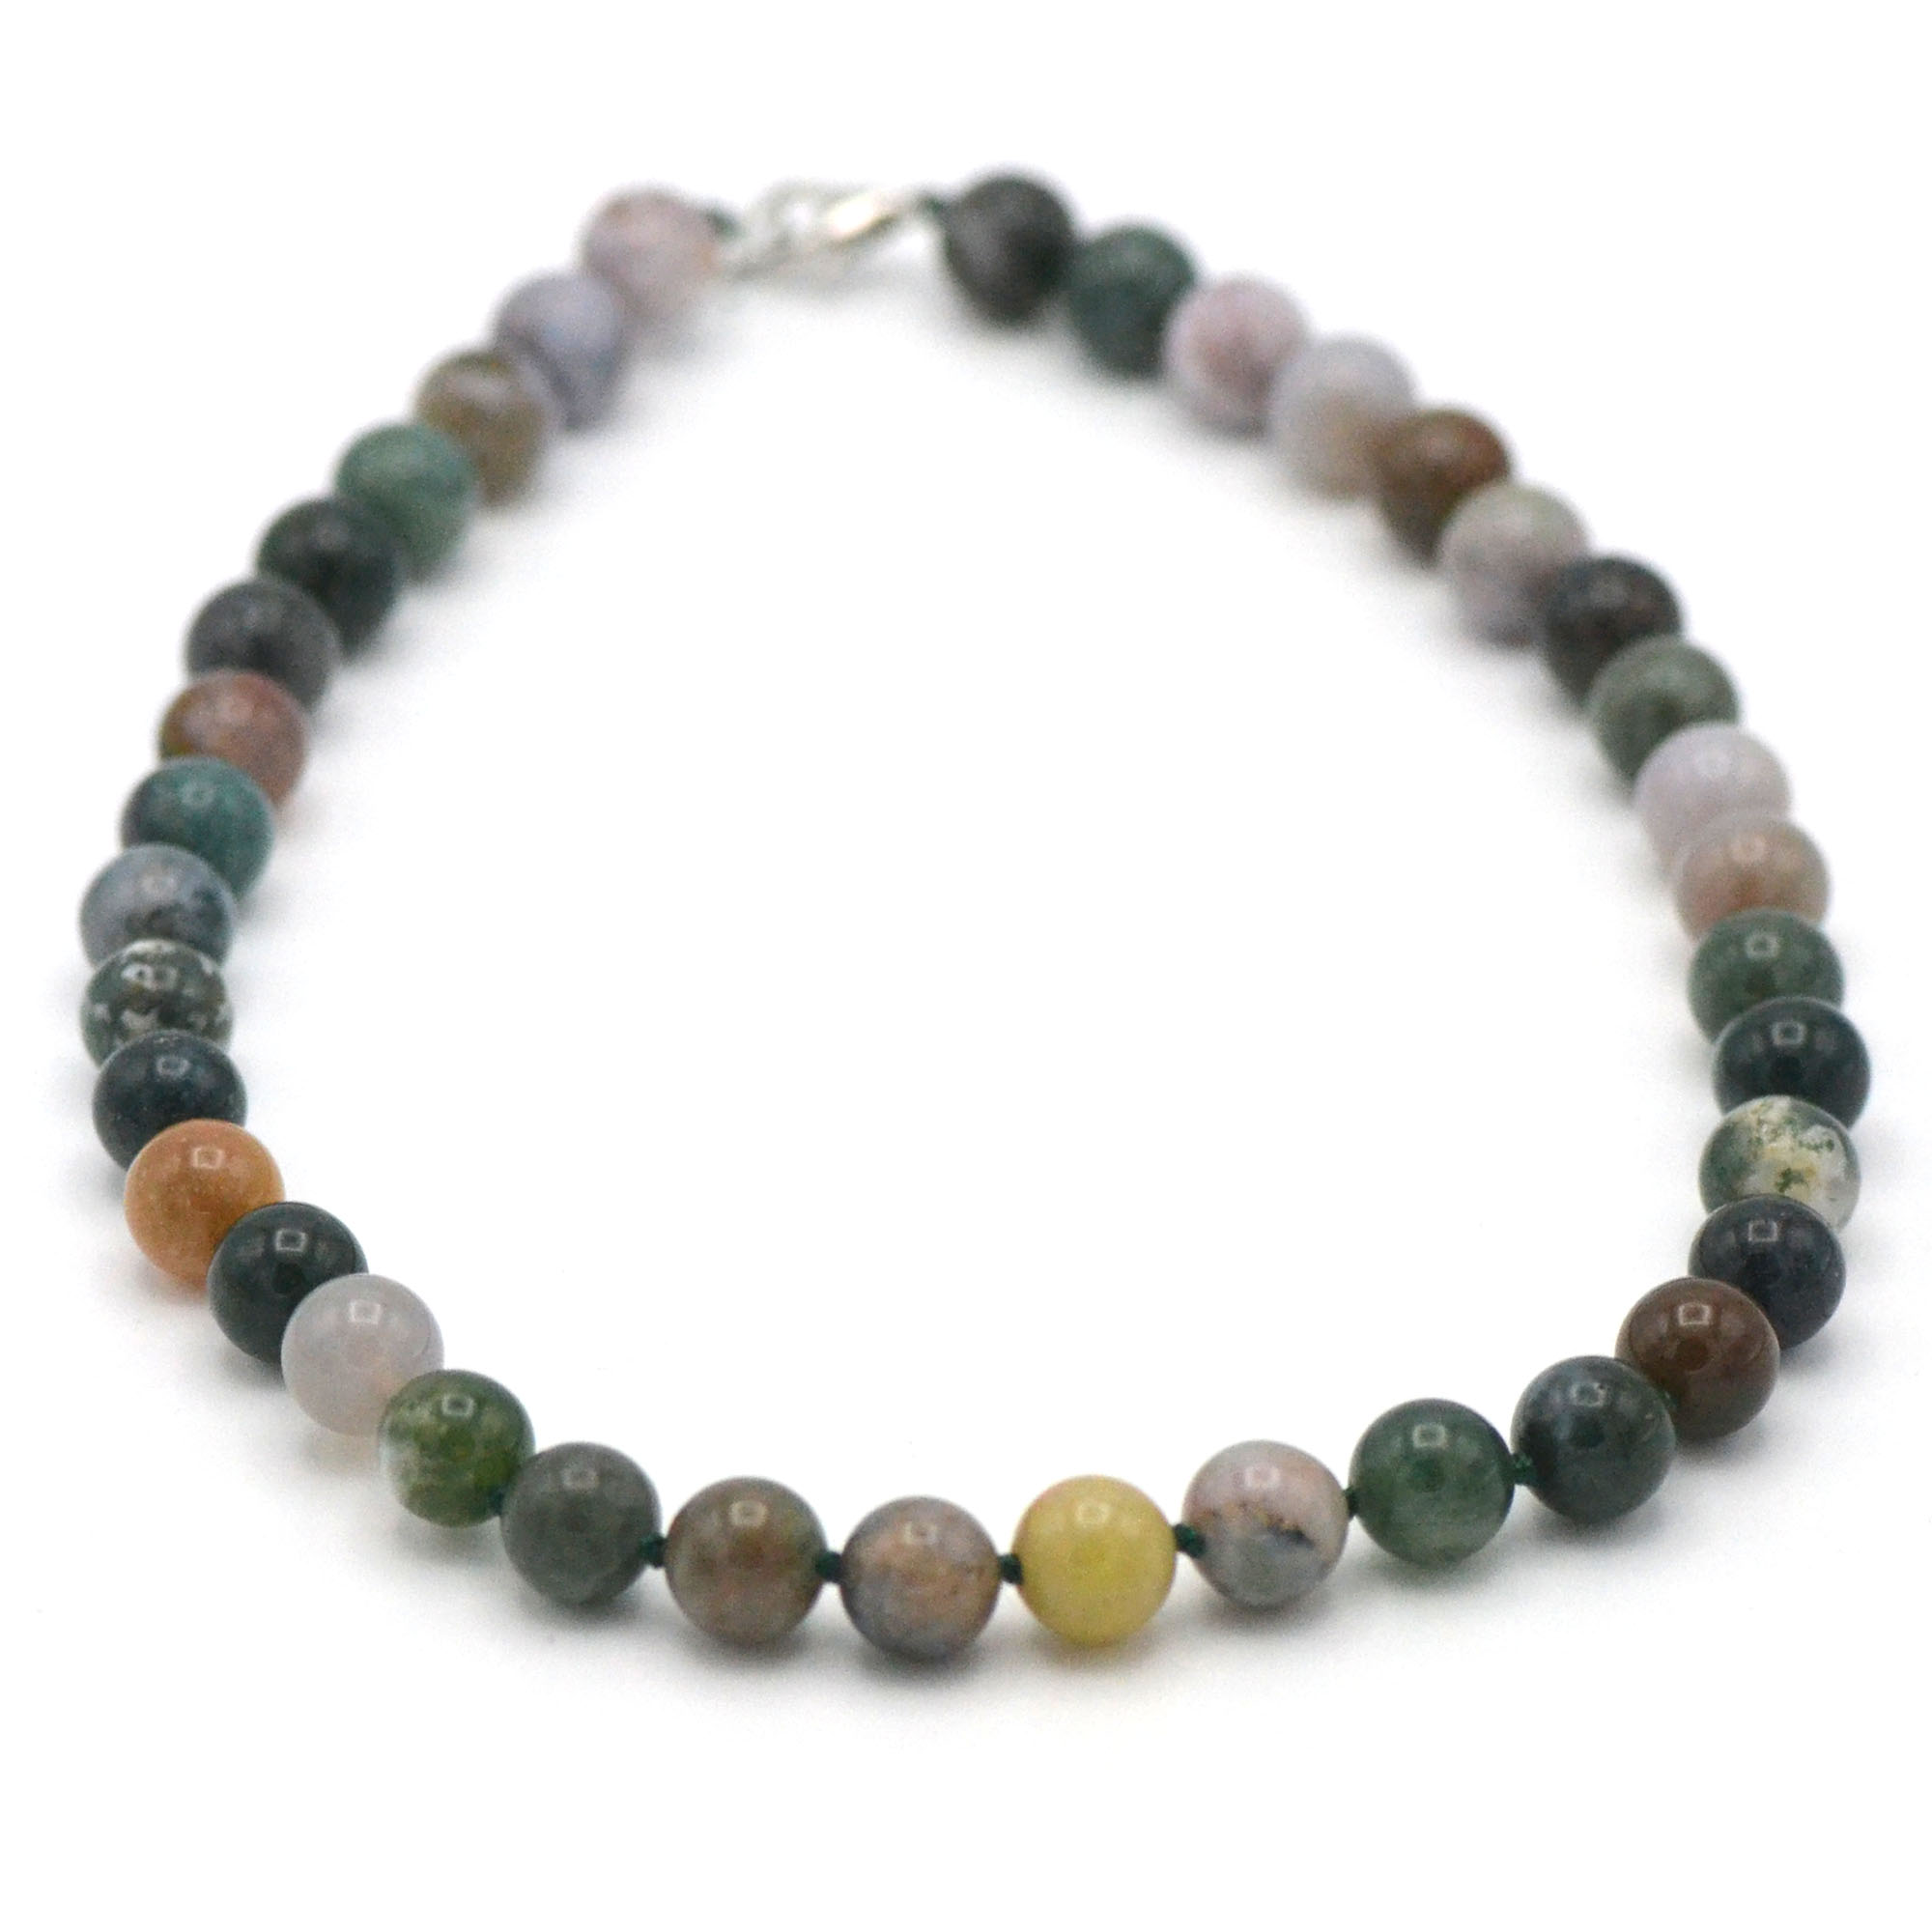 Collier agate indienne perle ronde 10 mm